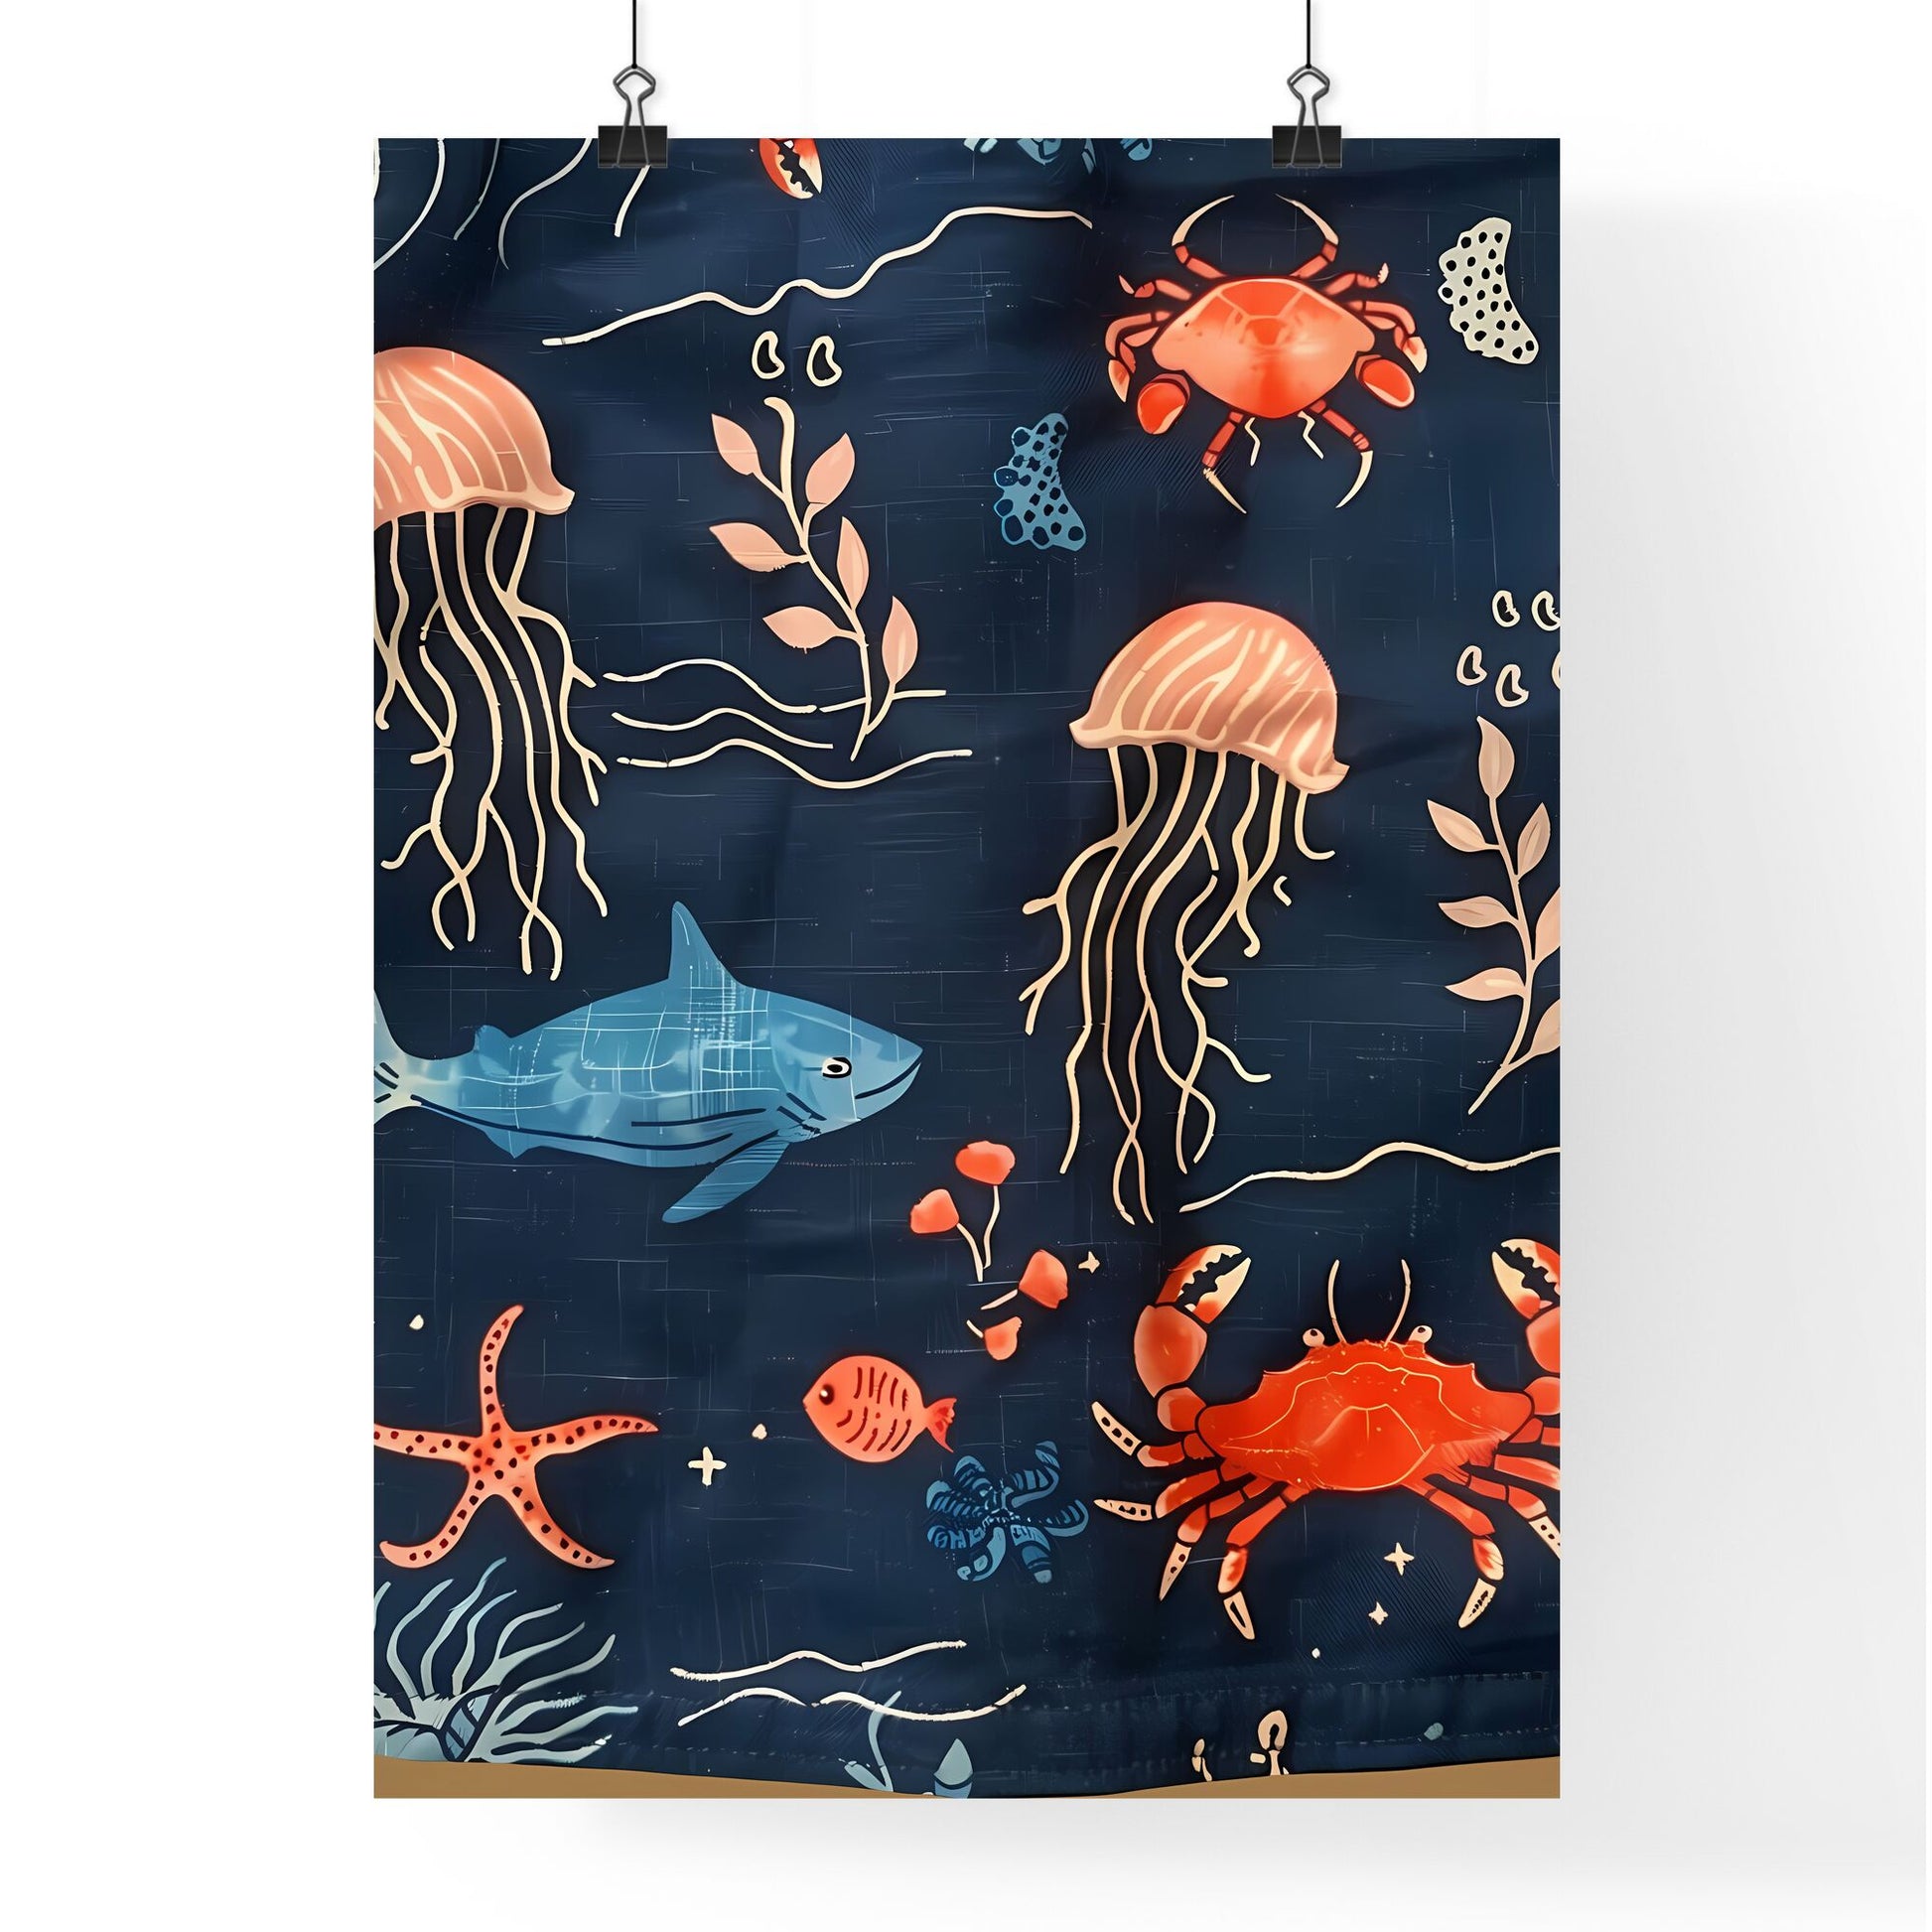 Vibrant Blue Marine Canvas Art: Playful Fish and Jellyfish Patterns in White and Blue Default Title